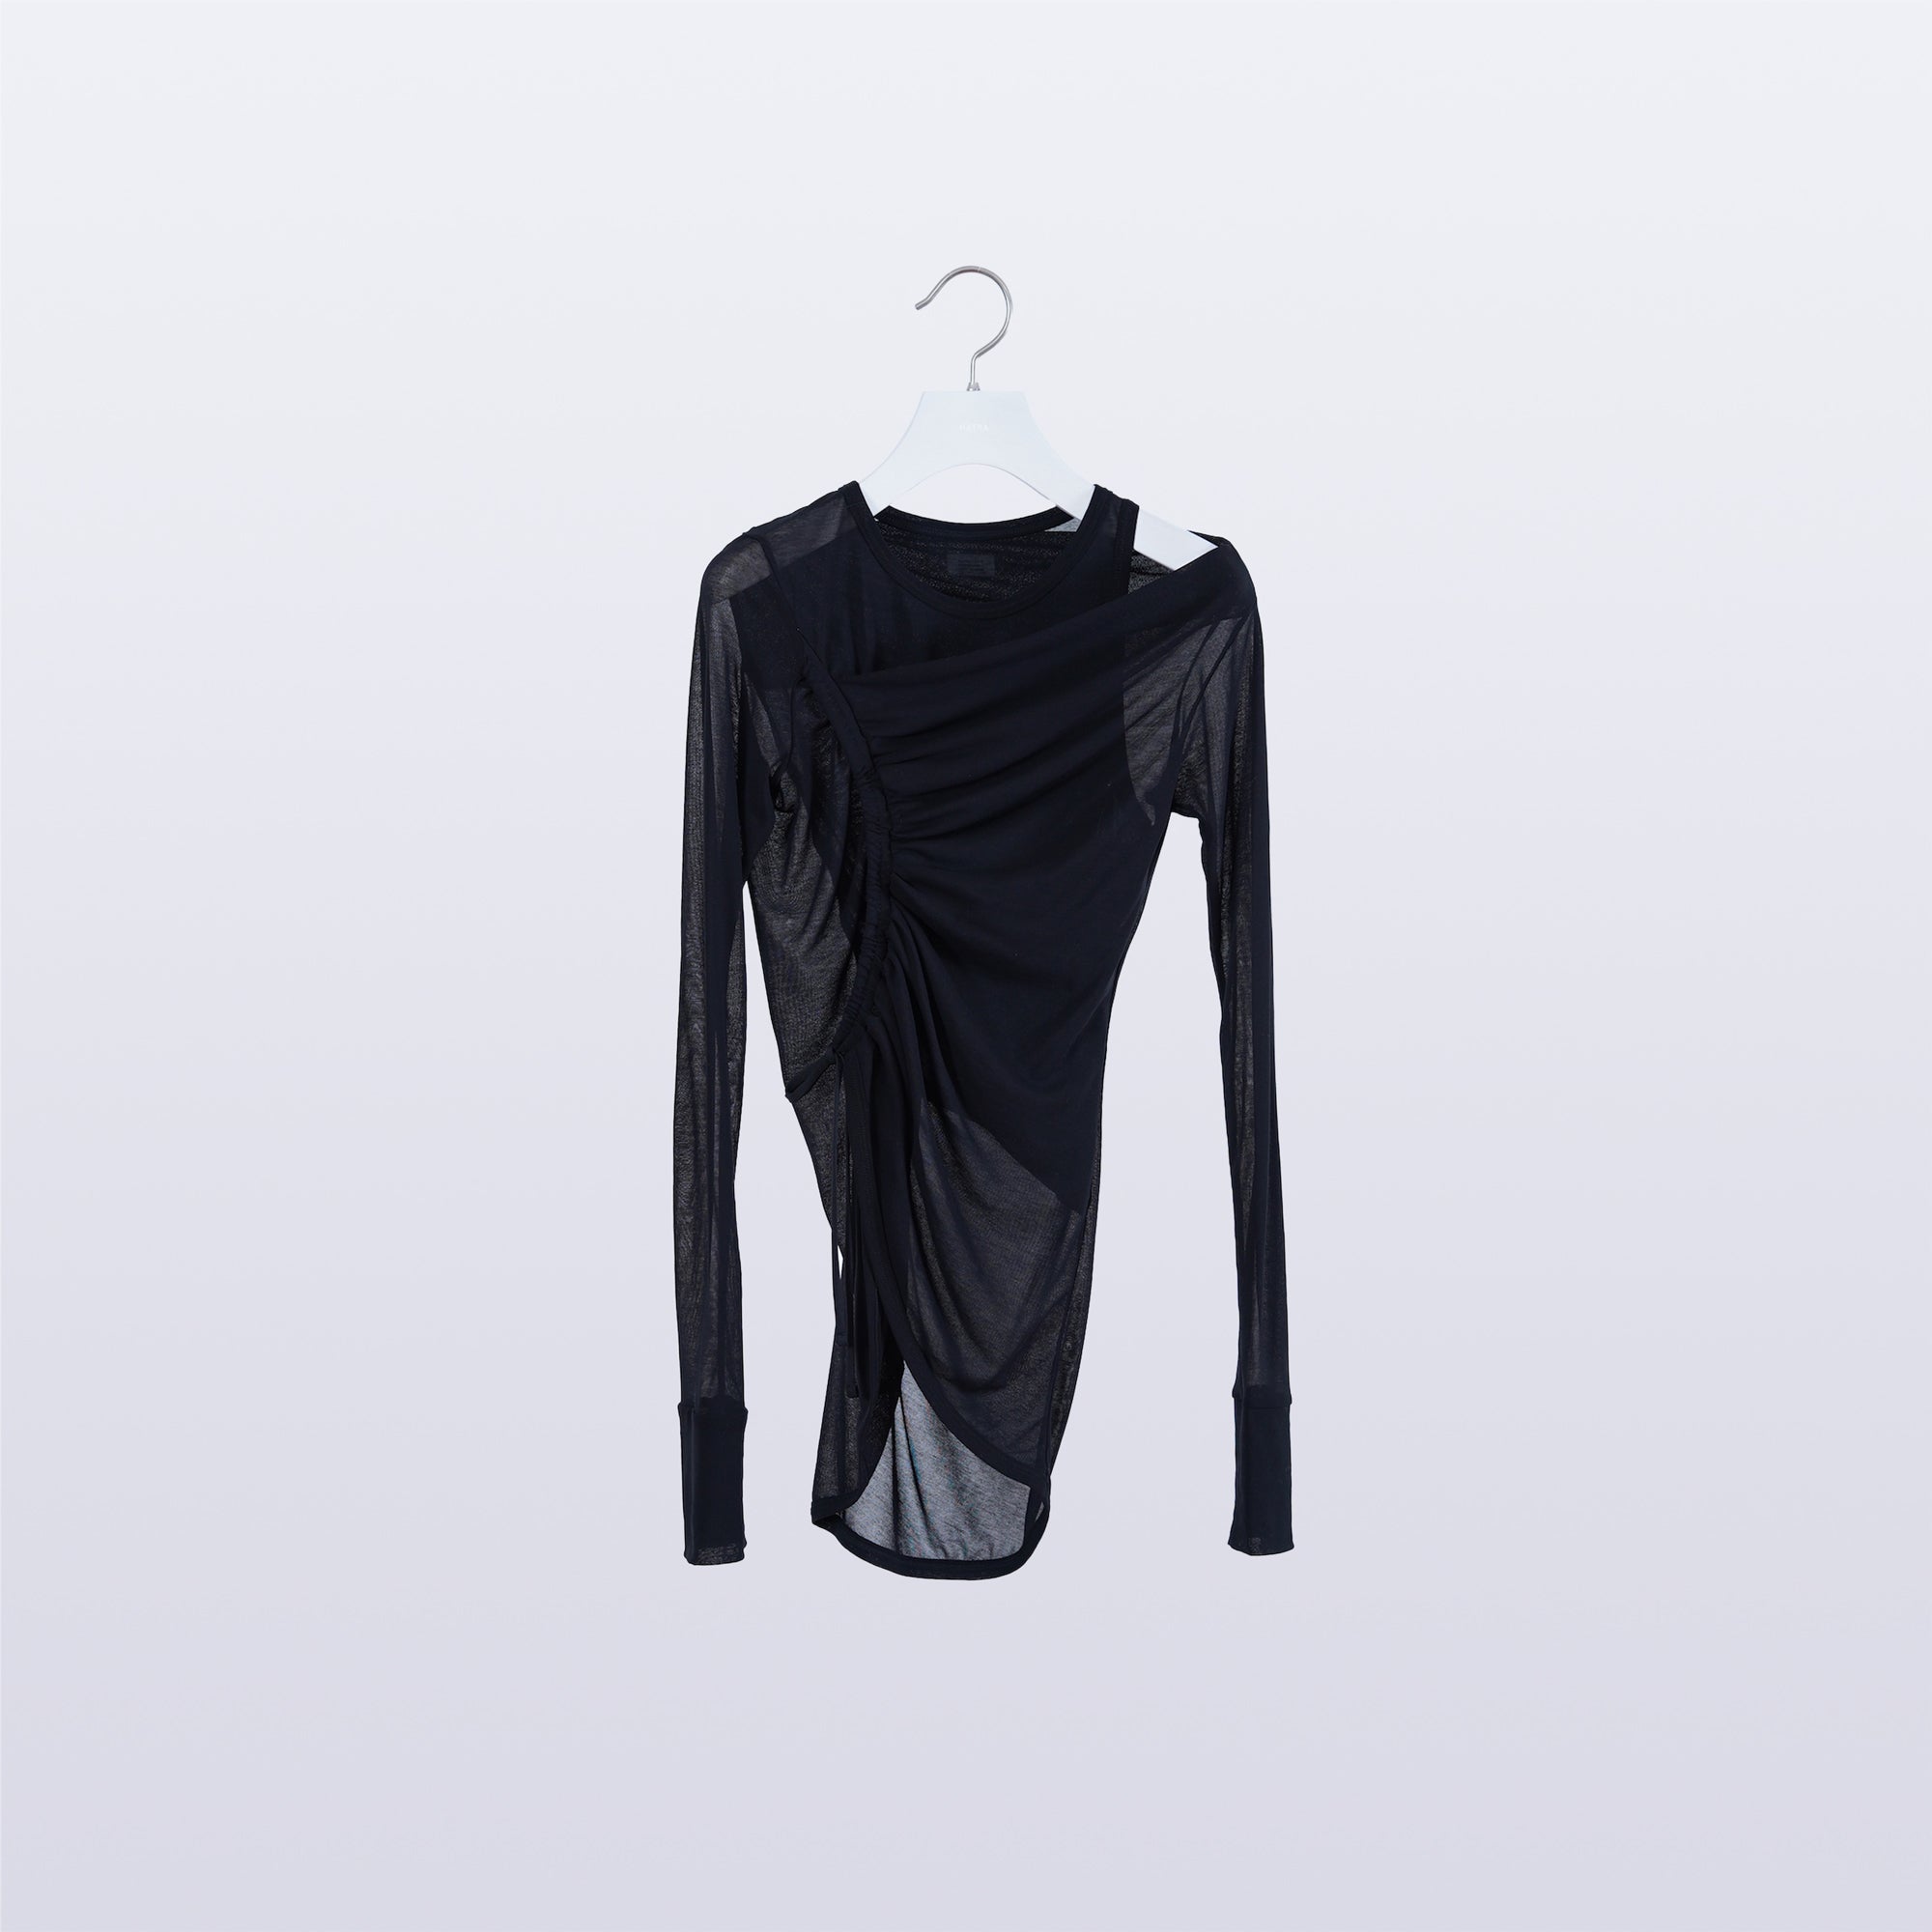 Equil Tank / black